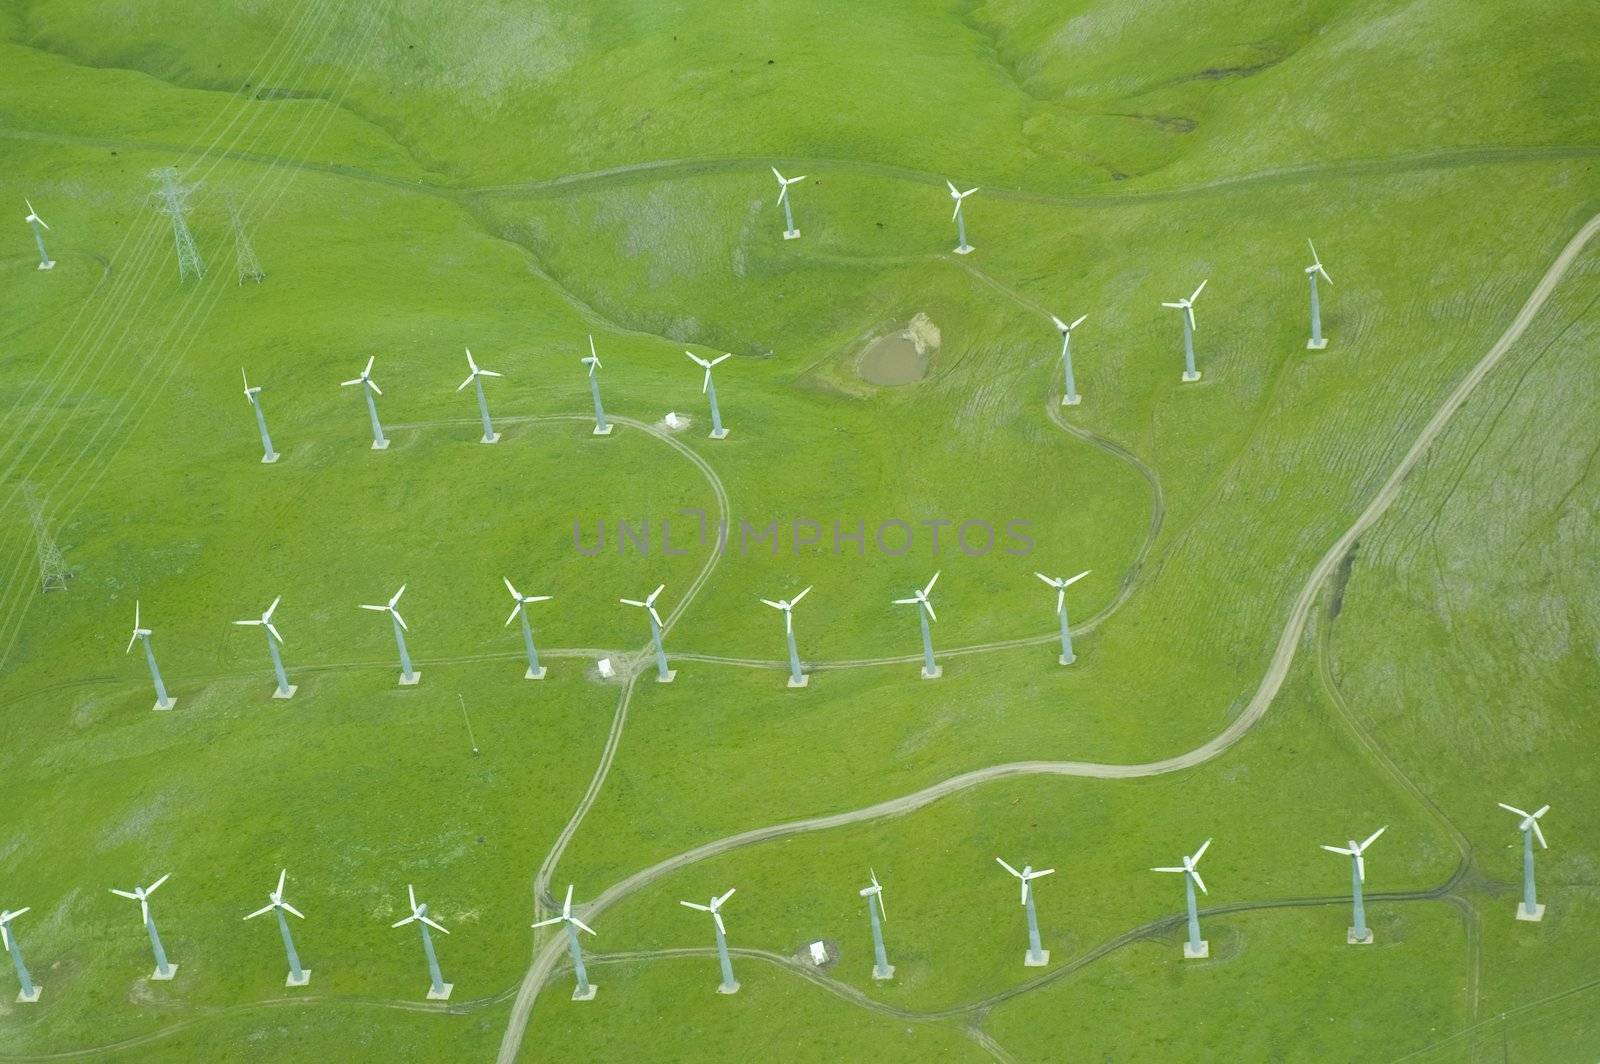 Alternate enrgy power source wind generators in California from the air